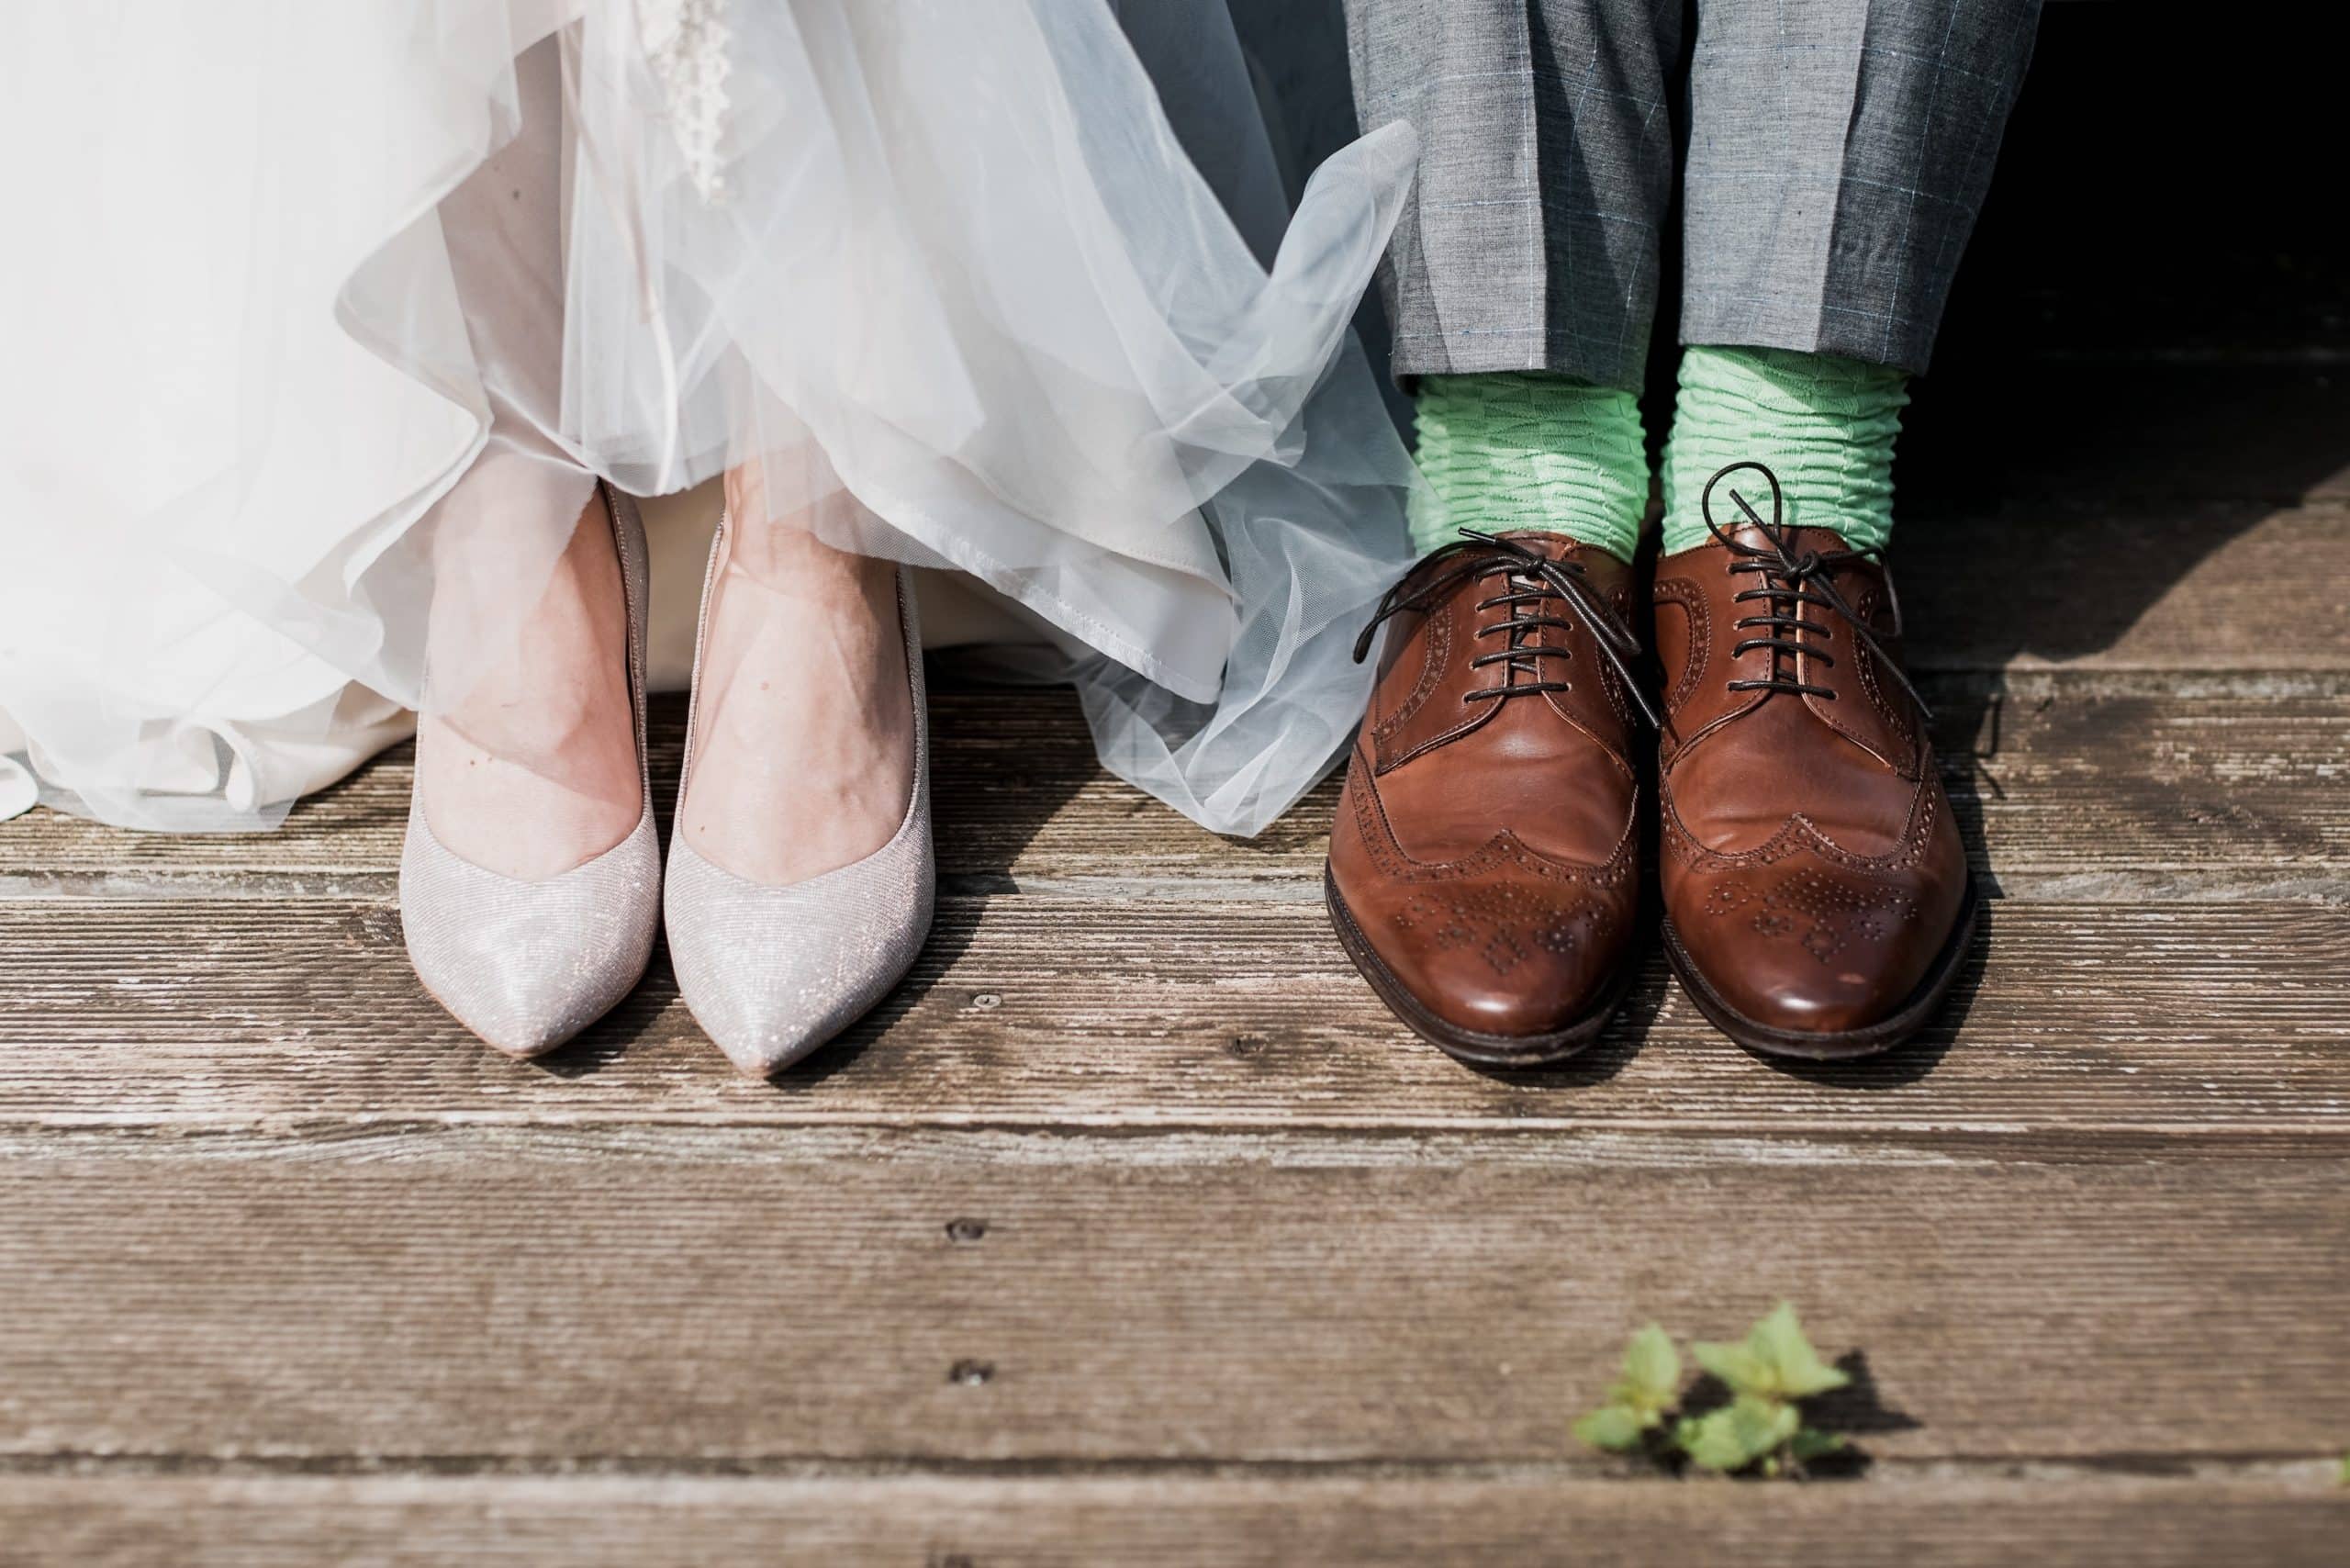 Wedding Stress: Don’t Forget This One Critical Thing